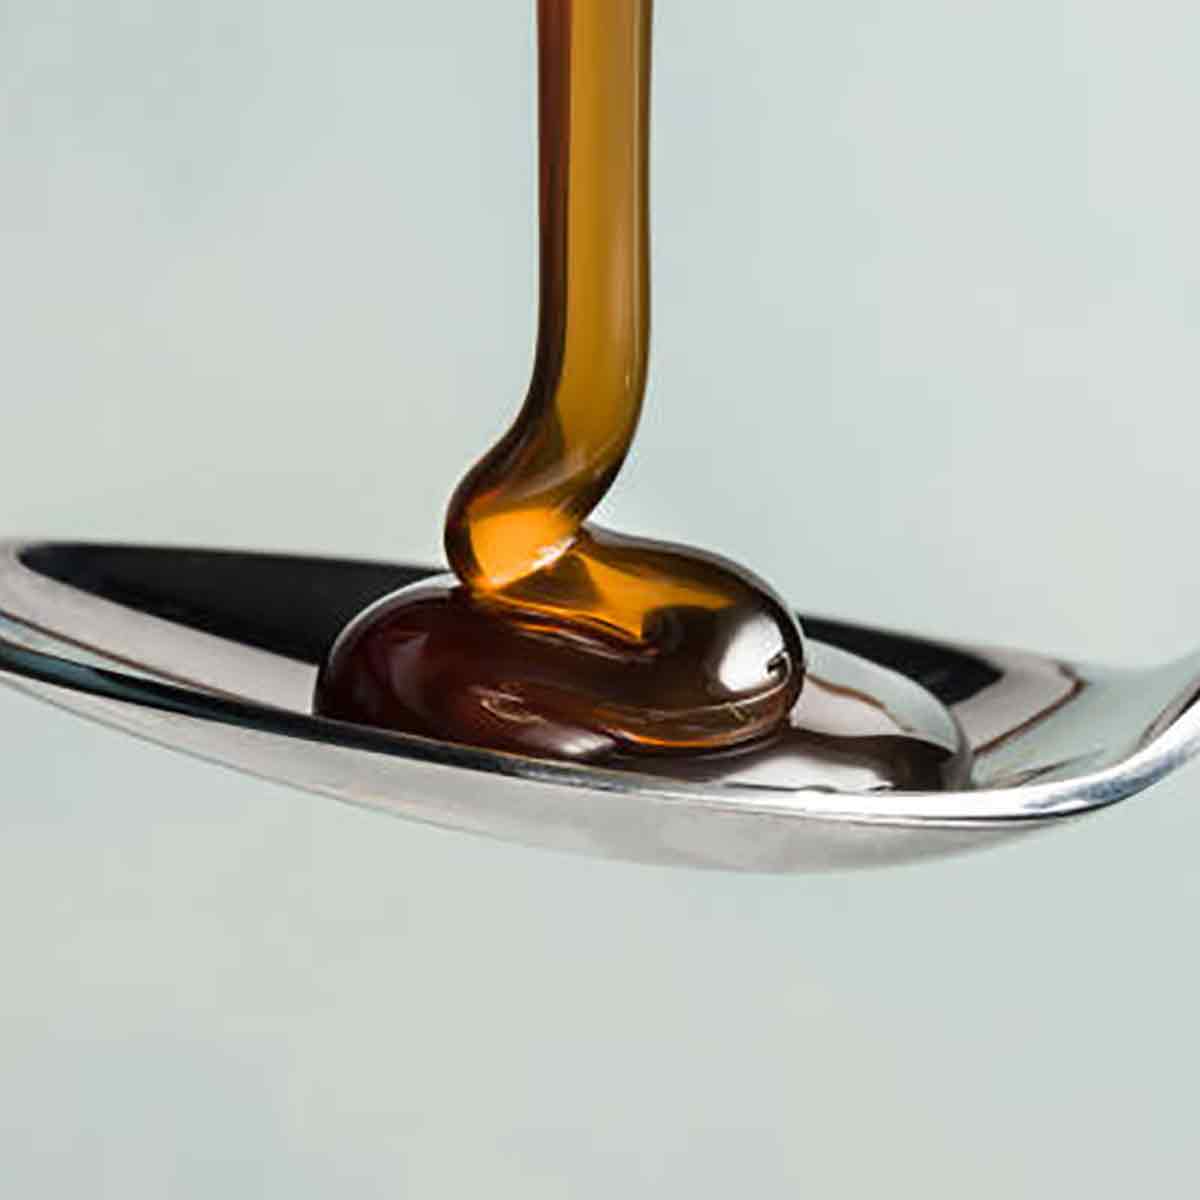 Syrup On A Spoon